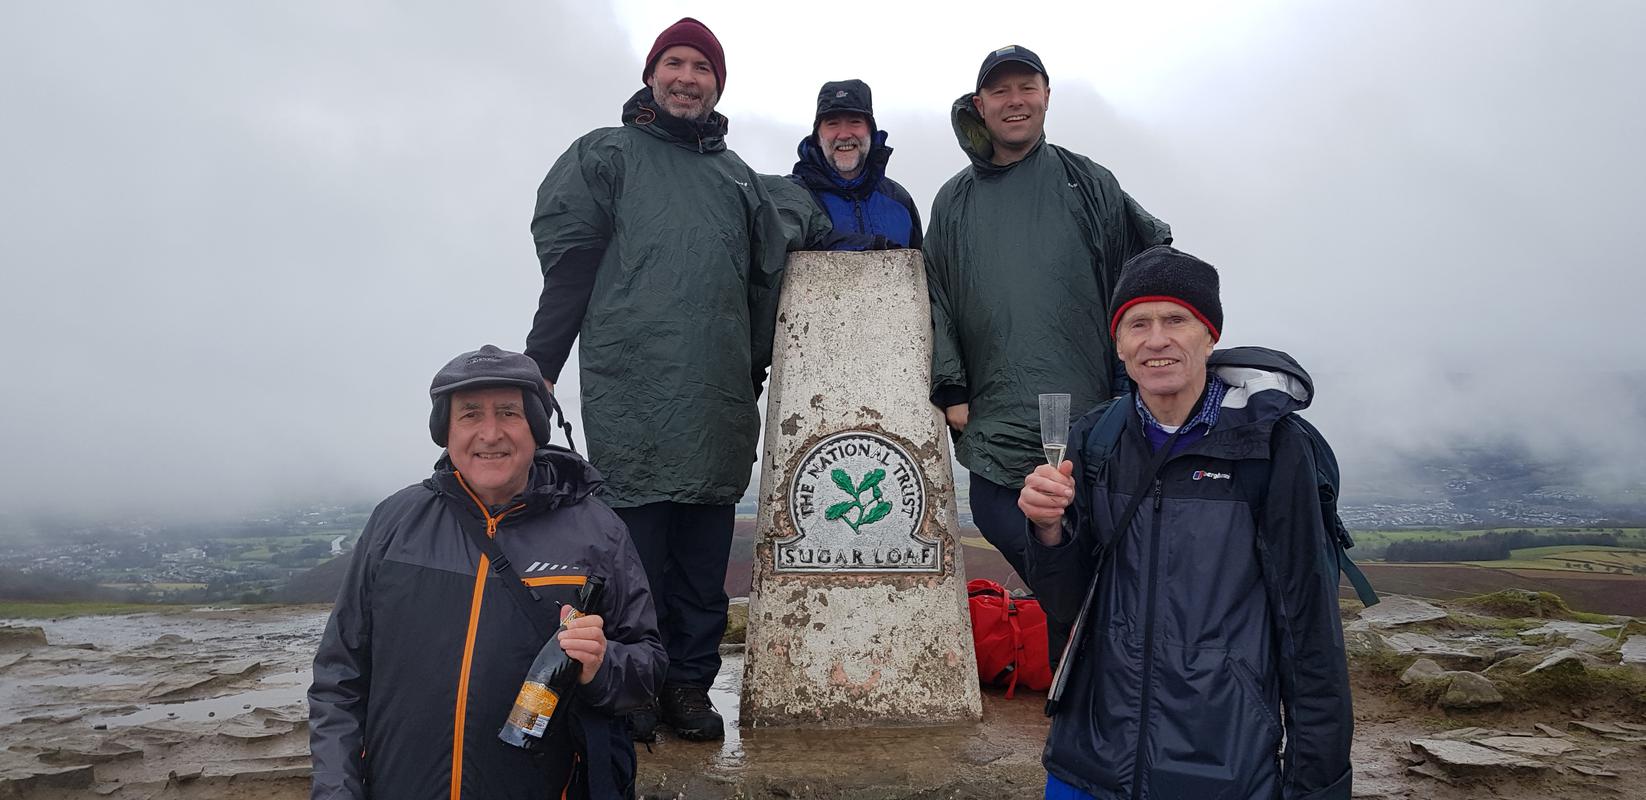 South Wales Group of the Gay Outdoor Club 20th anniversary walk to Sugar Loaf, Abergavenny, 26 January 2020.